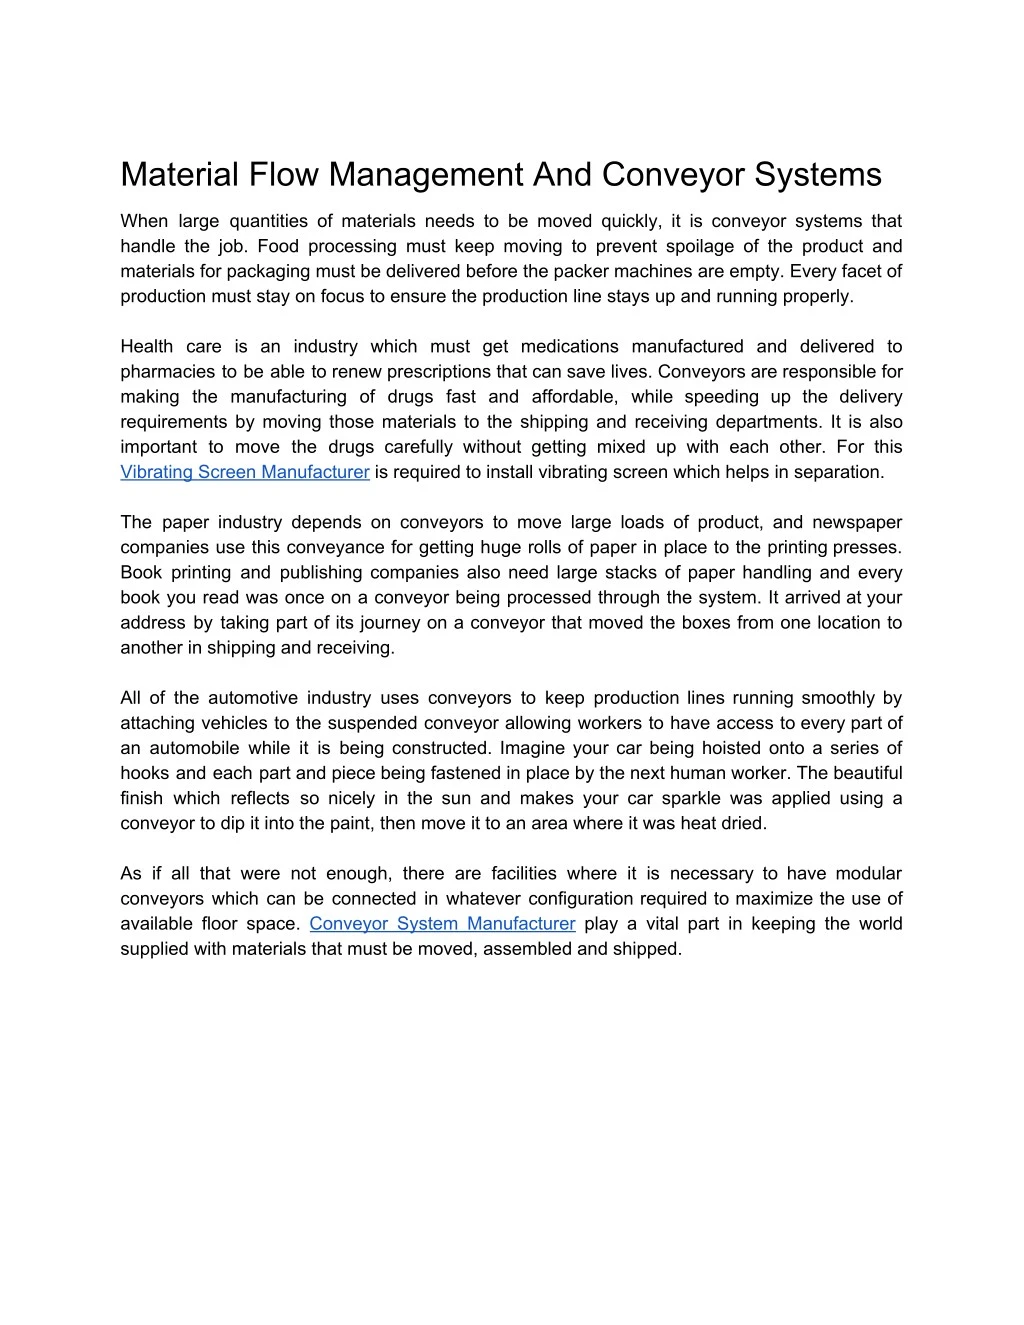 material flow management and conveyor systems